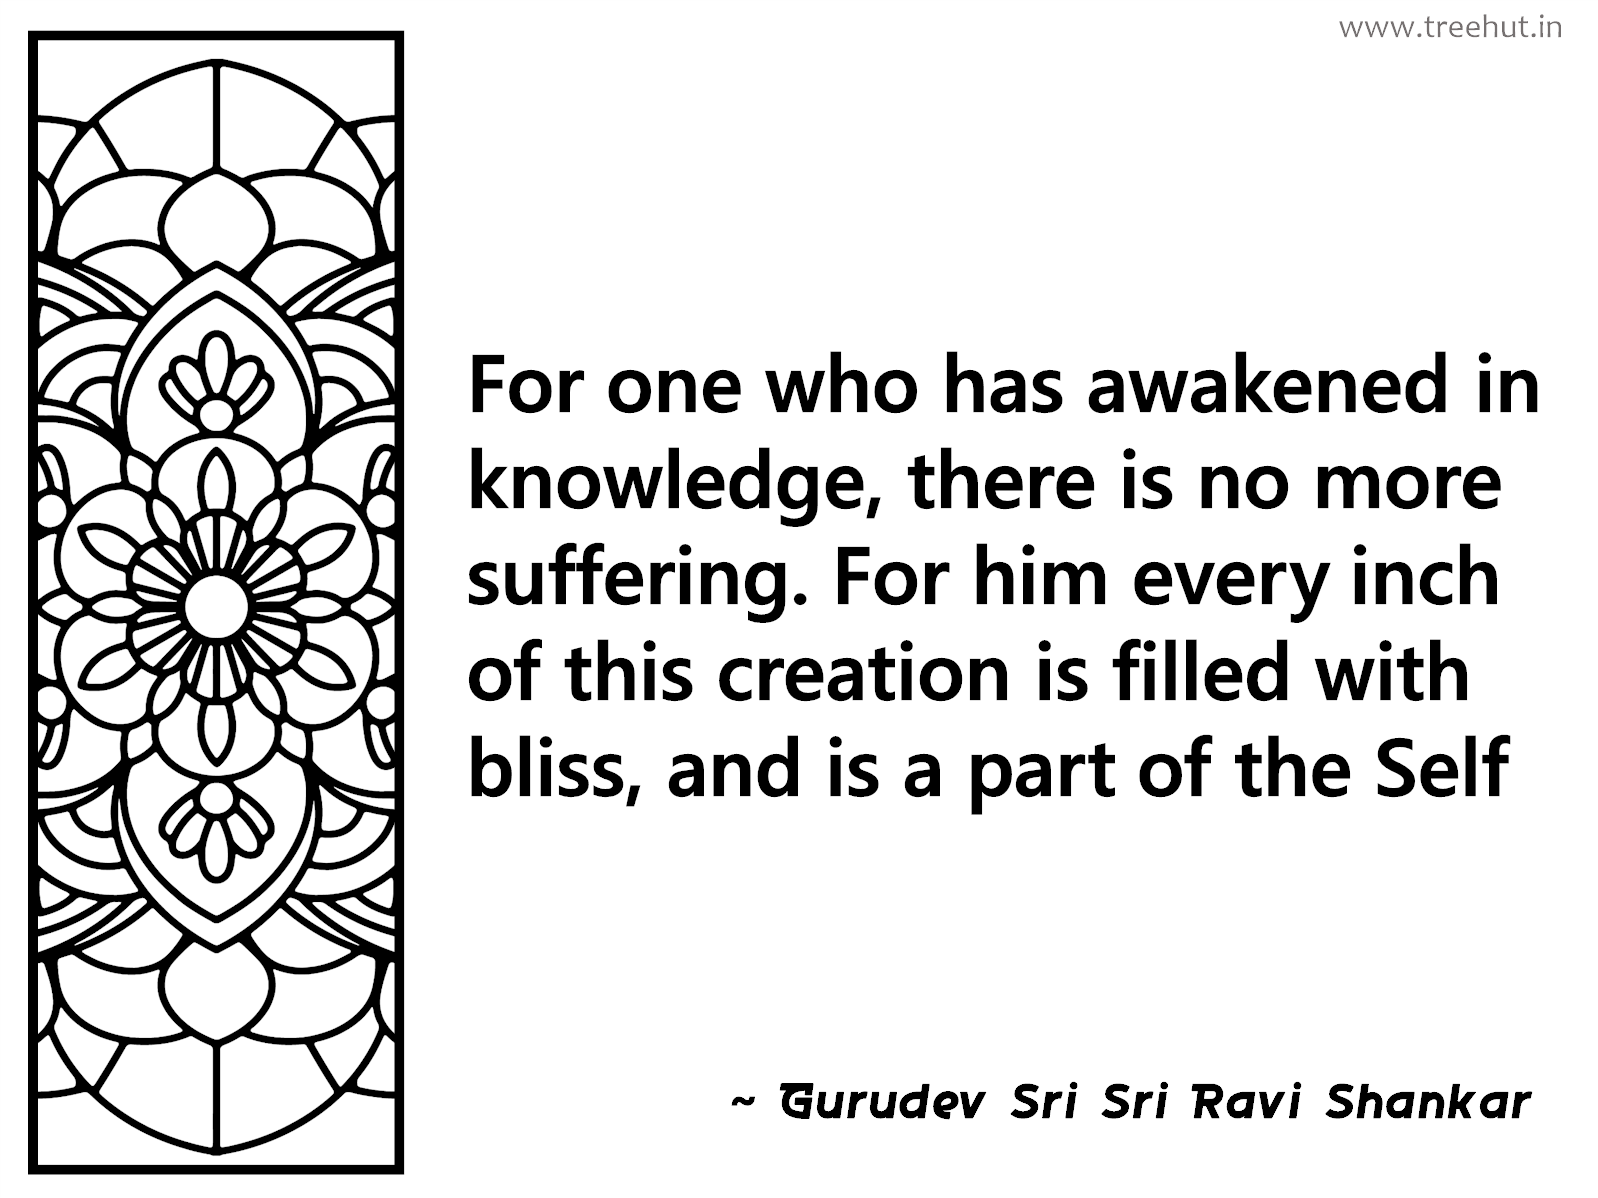 For one who has awakened in knowledge, there is no more suffering. For him every inch of this creation is filled with bliss, and is a part of the Self Inspirational Quote by Gurudev Sri Sri Ravi Shankar, coloring pages